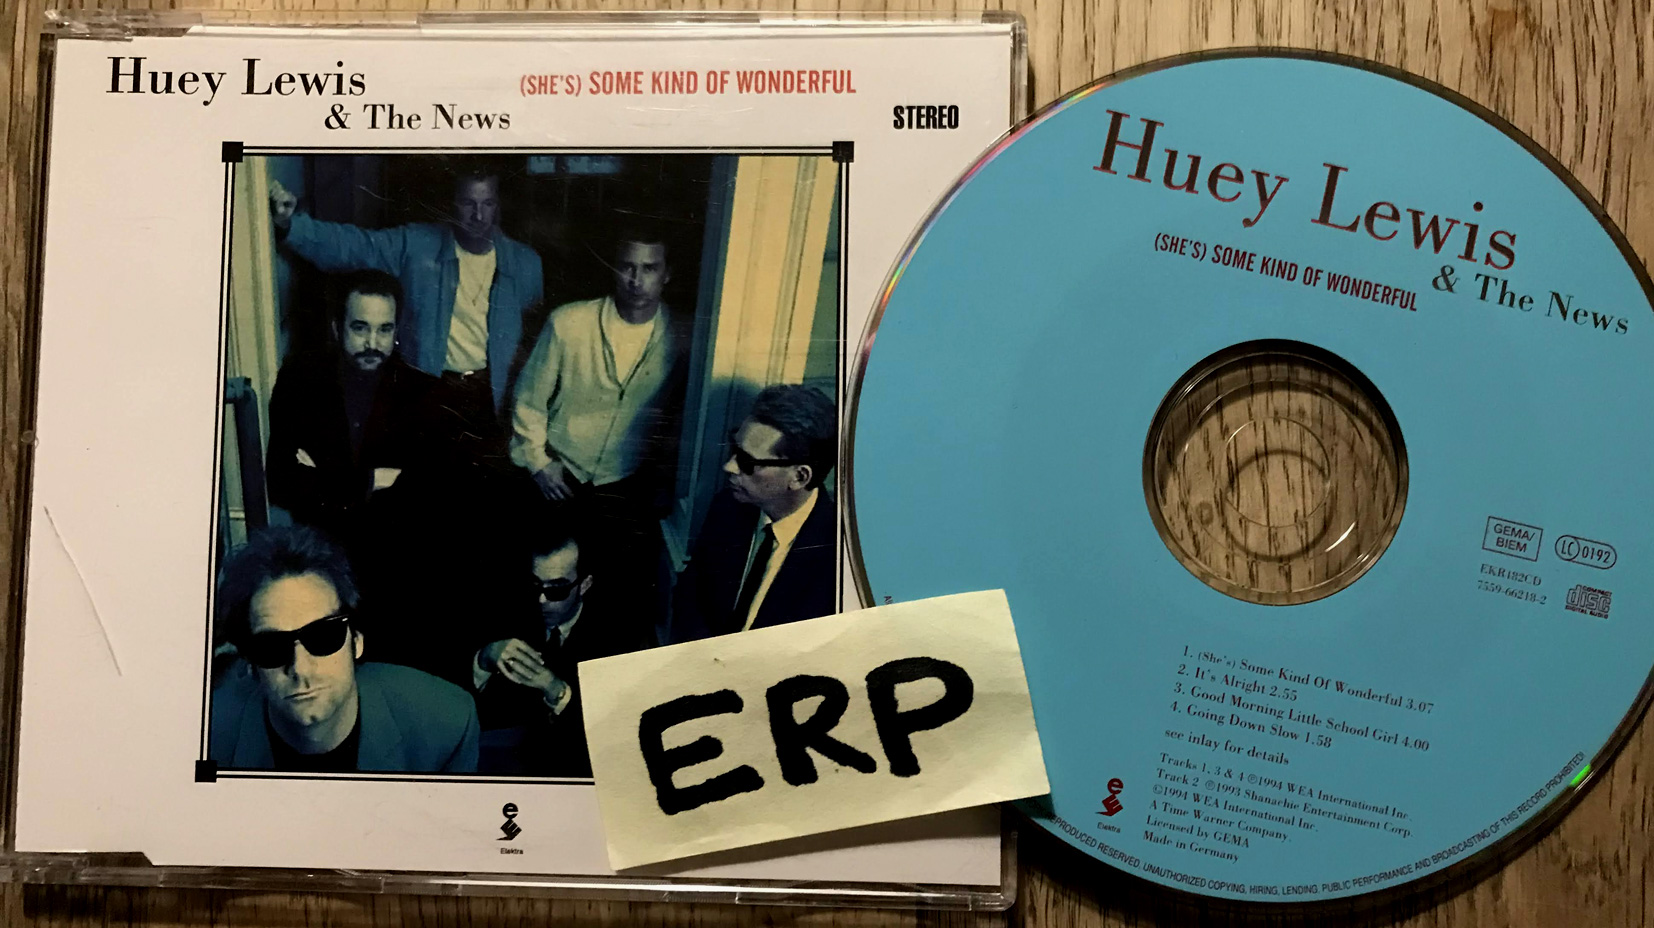 Huey Lewis And The News-(Shes) Some Kind Of Wonderful-CDM-FLAC-1994-ERP Download